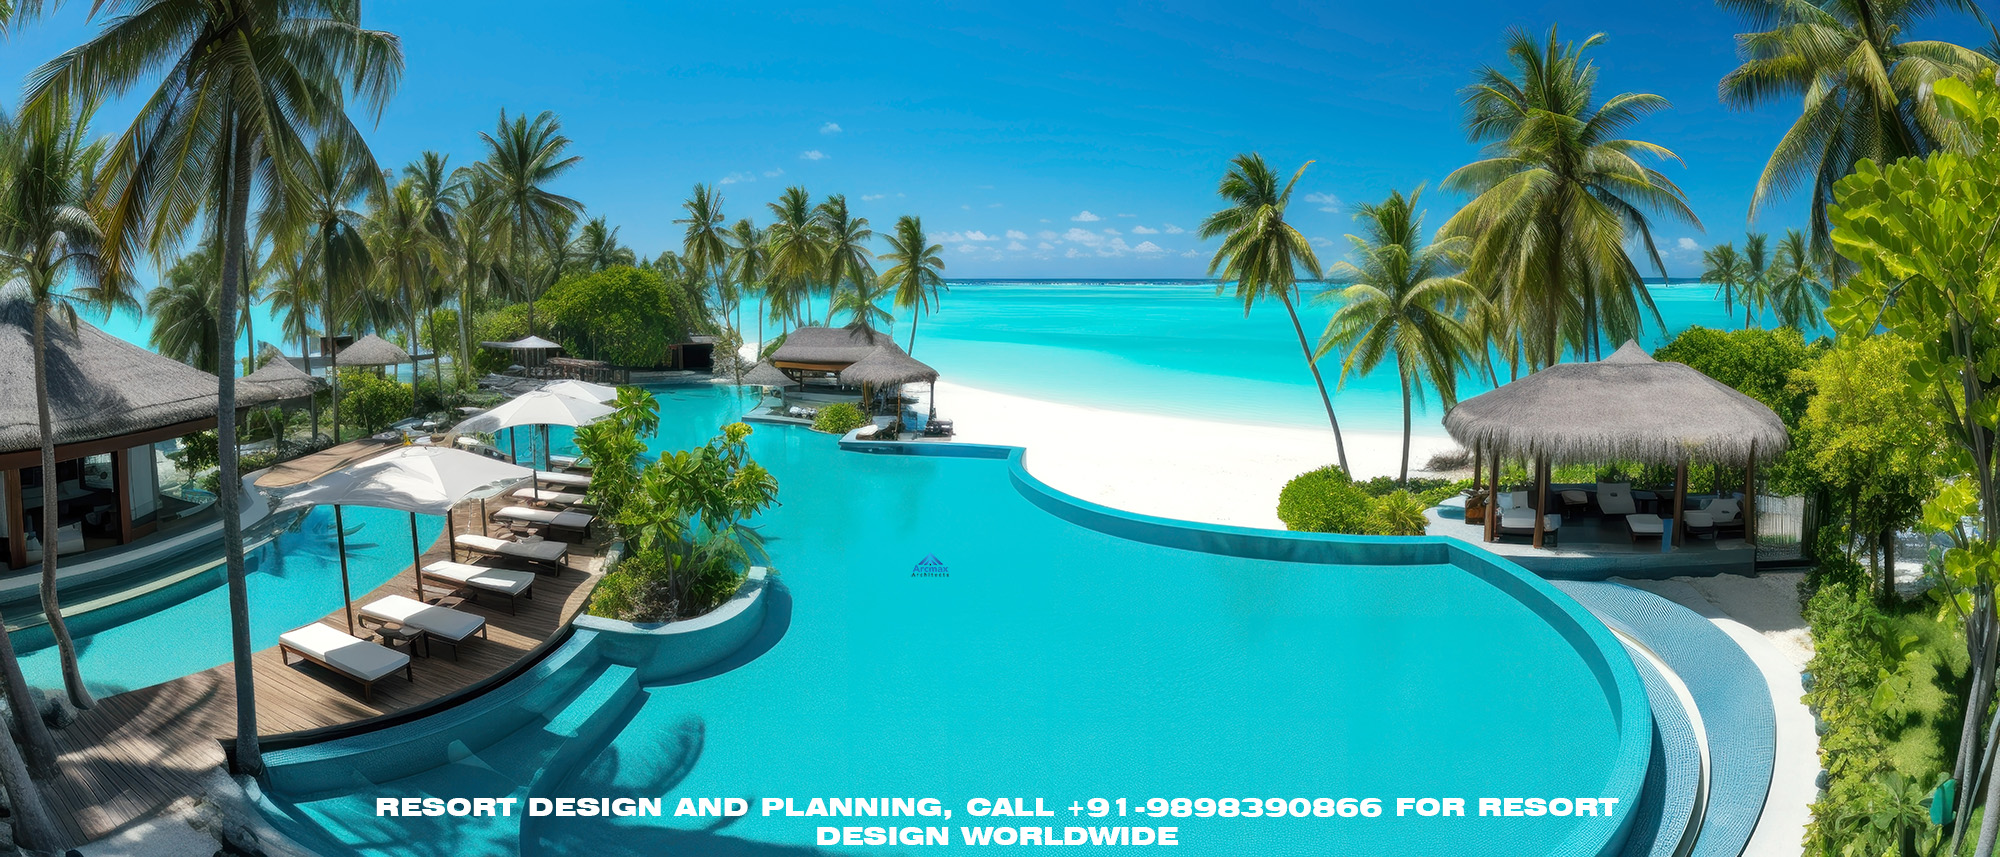 Sample Resort Design and Planning1, Best Resort architects in India